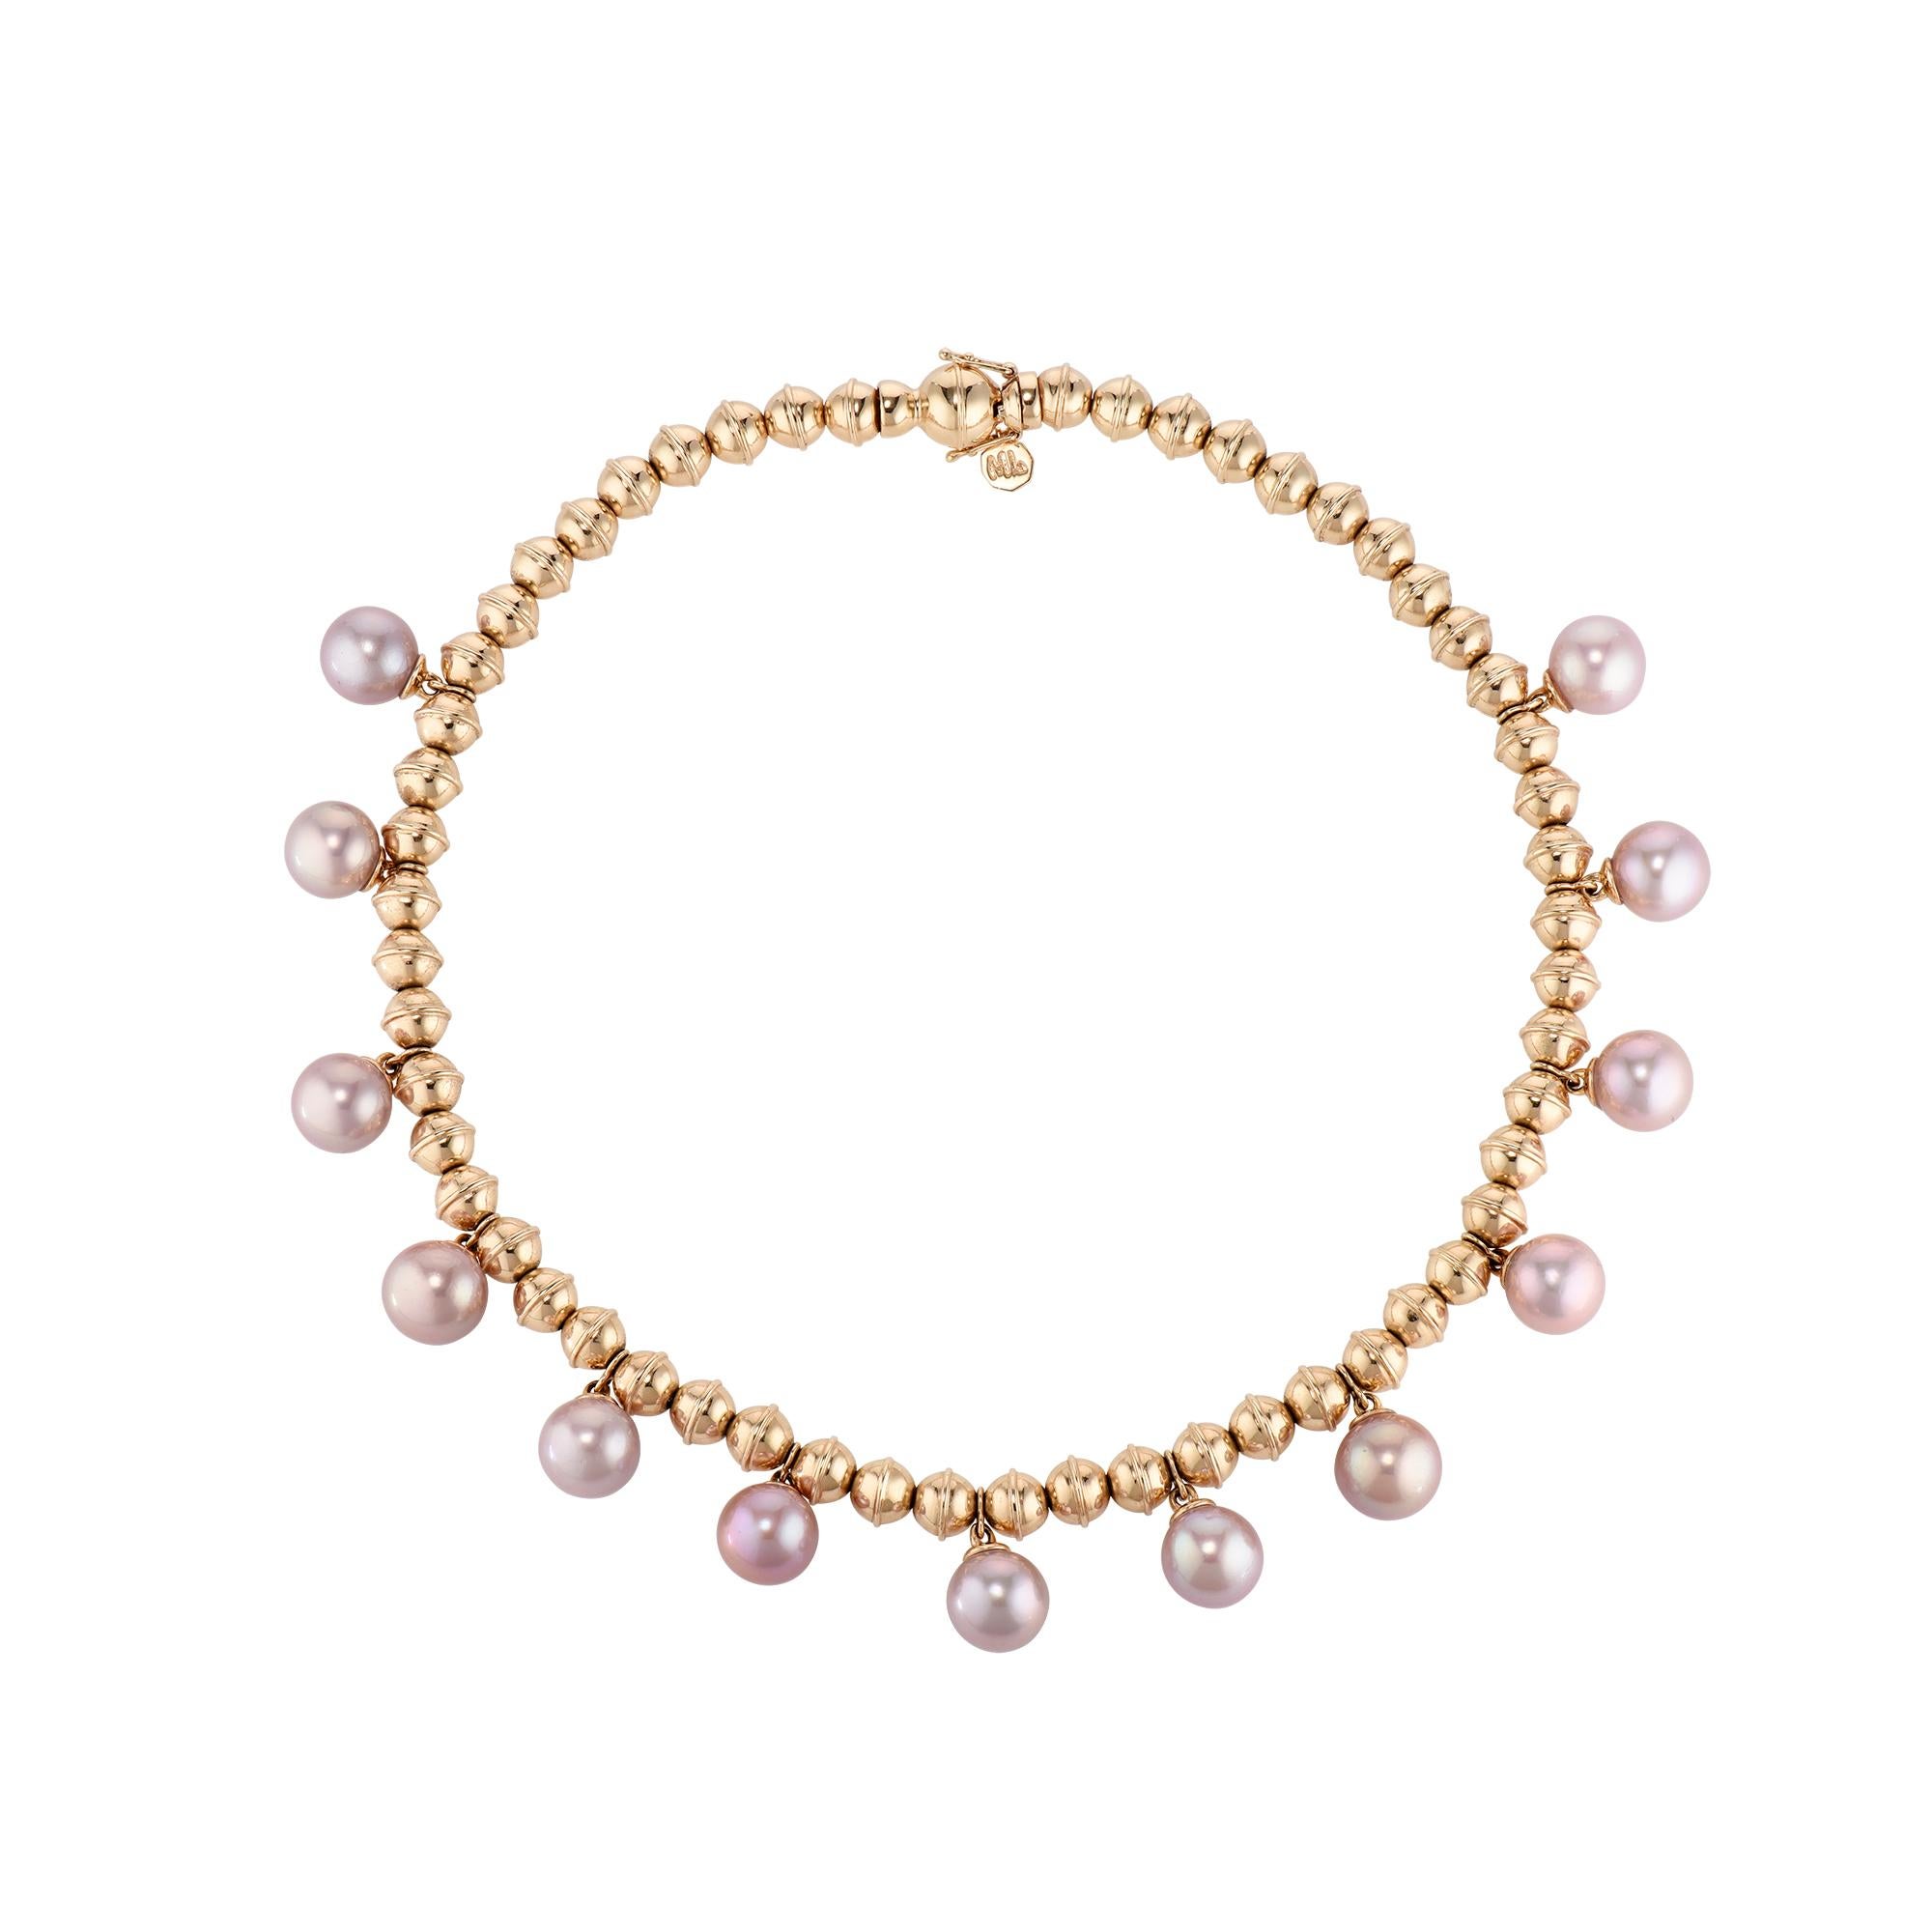 From the American Southwest and beyond, this elegant yet edgy 14 Karat yellow gold Marlo Laz Squash Blossom bead collar with dancing and dangling Pink Pearls, allows you to carry the serenity and the mystic of the desert with you, wherever you go.